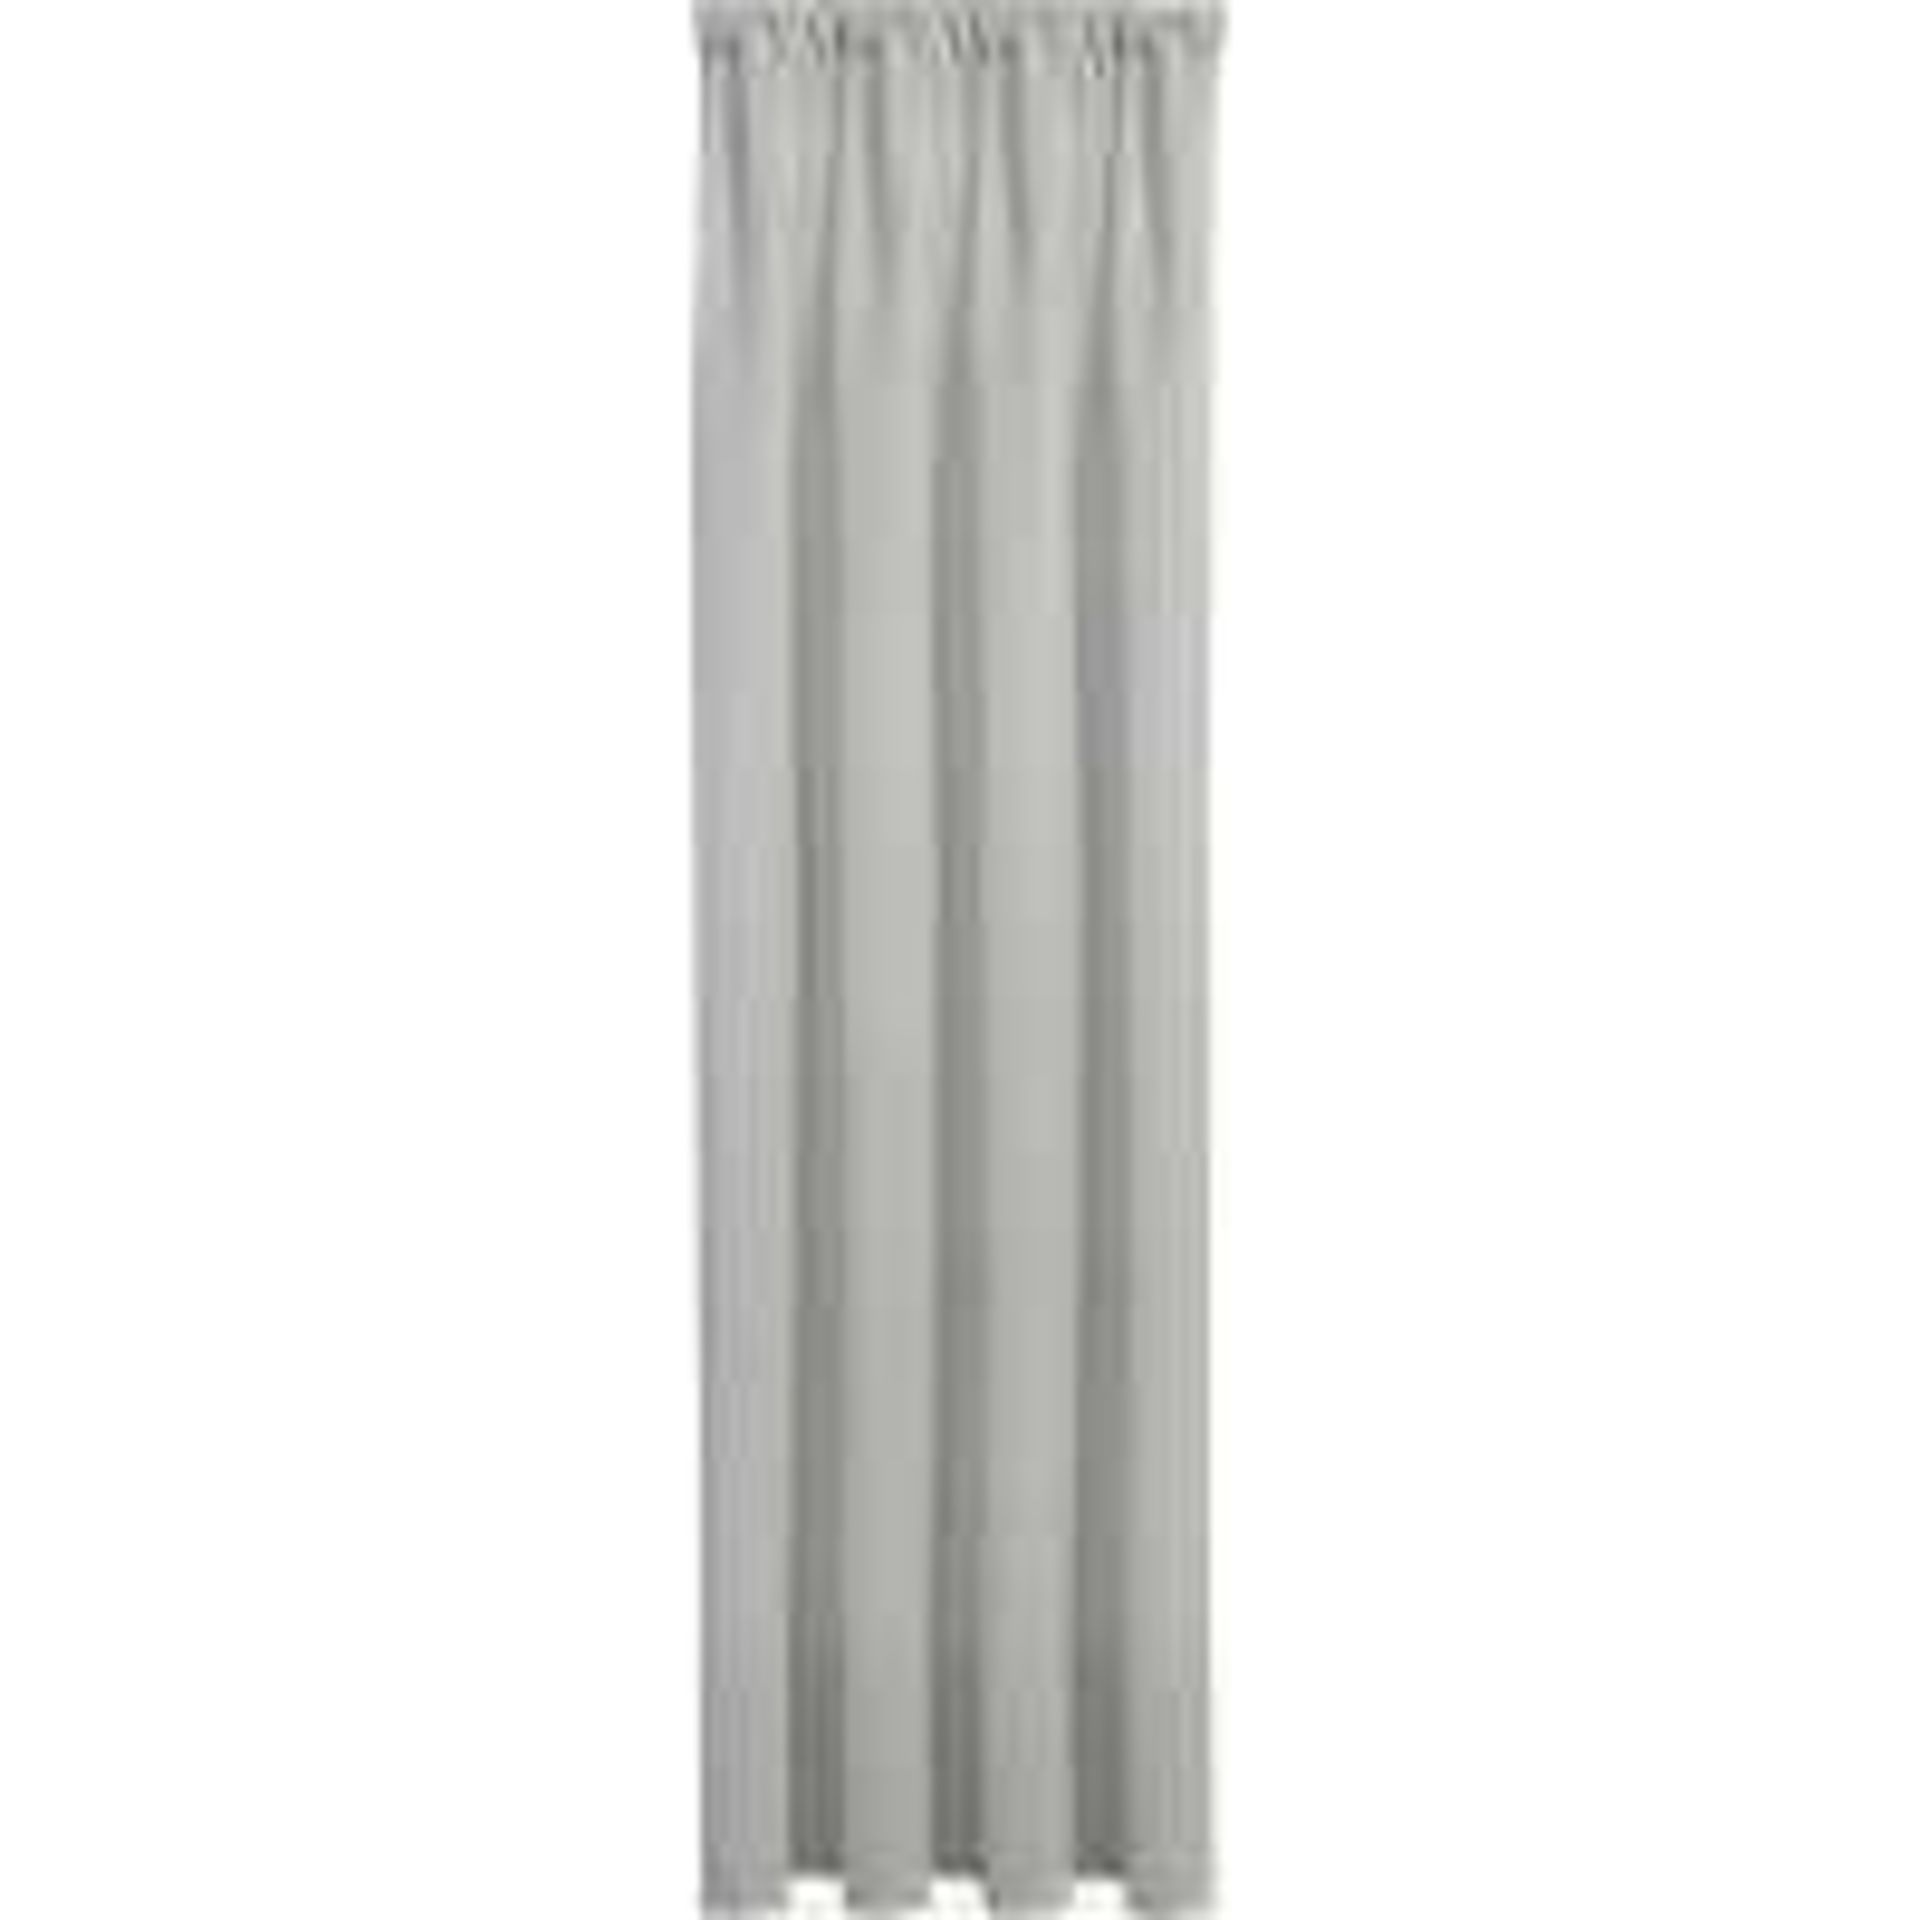 Combined Rrp £150. Lot To Contain 5 Boxed Feel Of Nature Decorative Curtains - Light Grey.